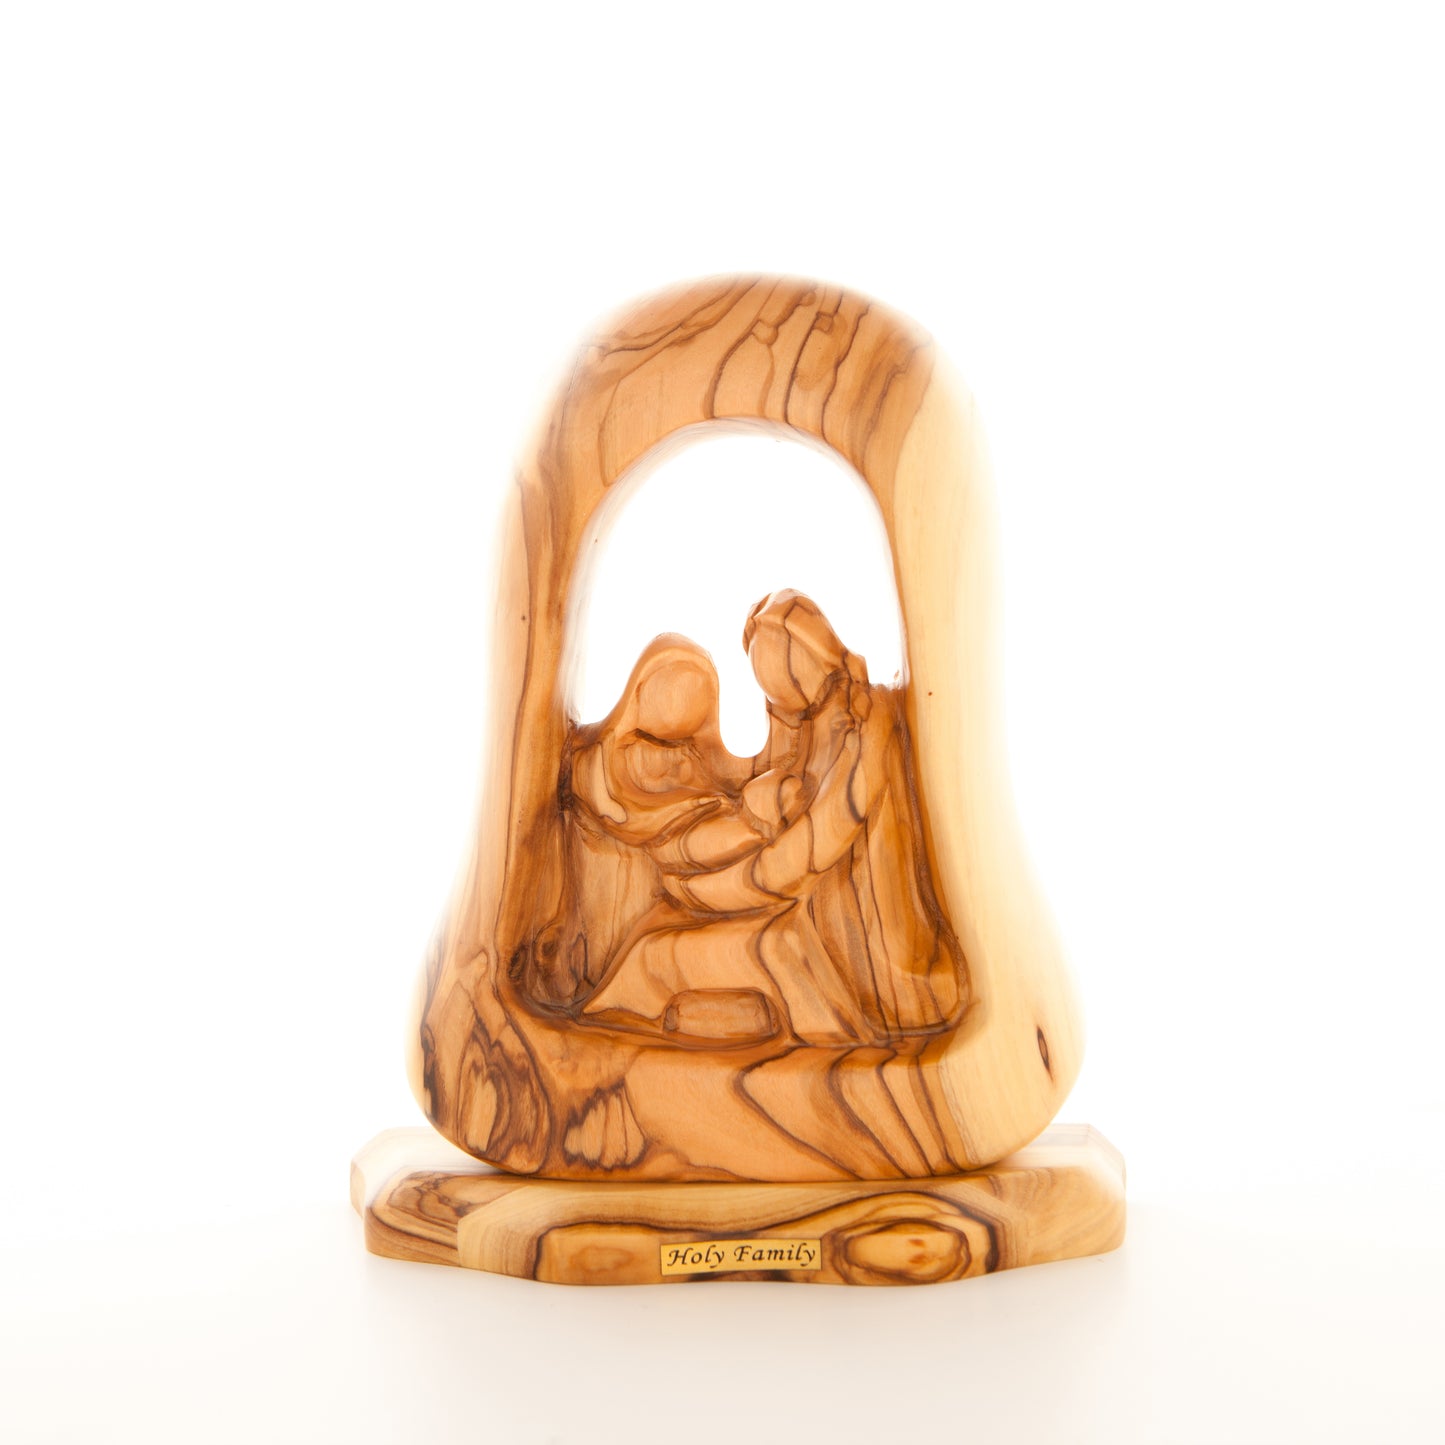 Holy Family Nativity Scene (Abstract), 5.1" Wooden Carved Figurine